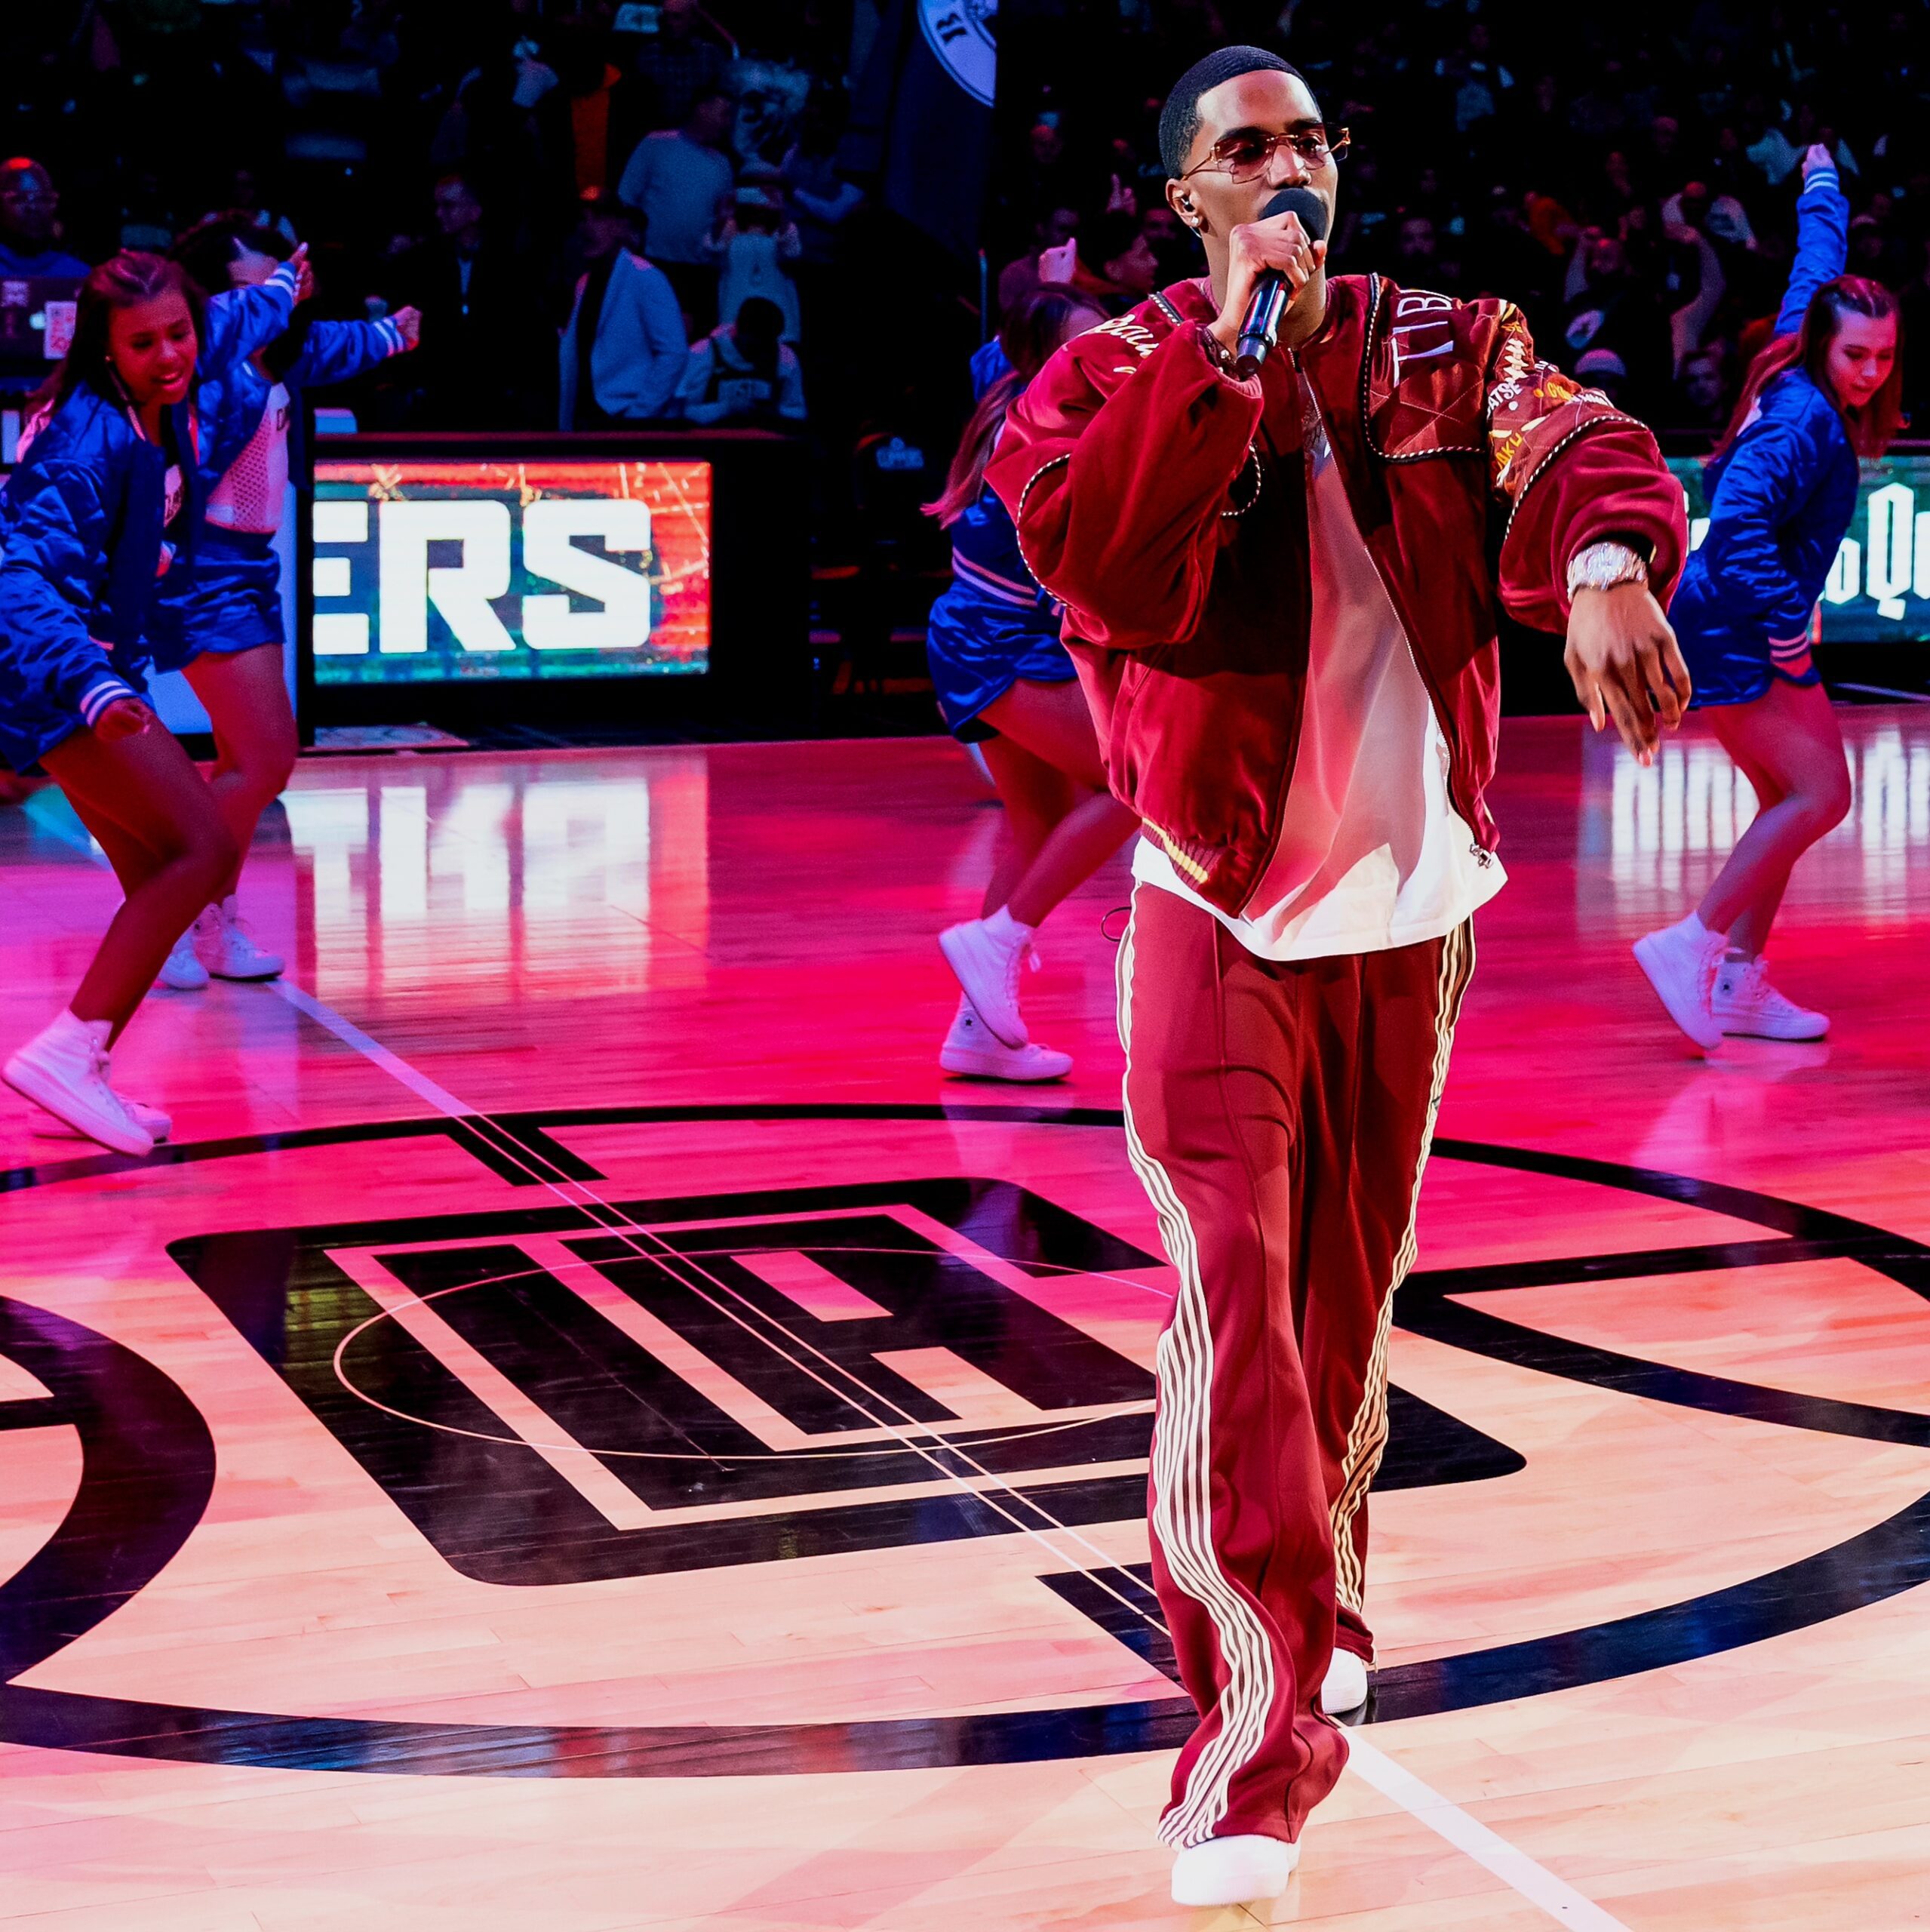 Christian King Combs performs at LA CLIPPERS half-time show via 360 MAGAZINE.